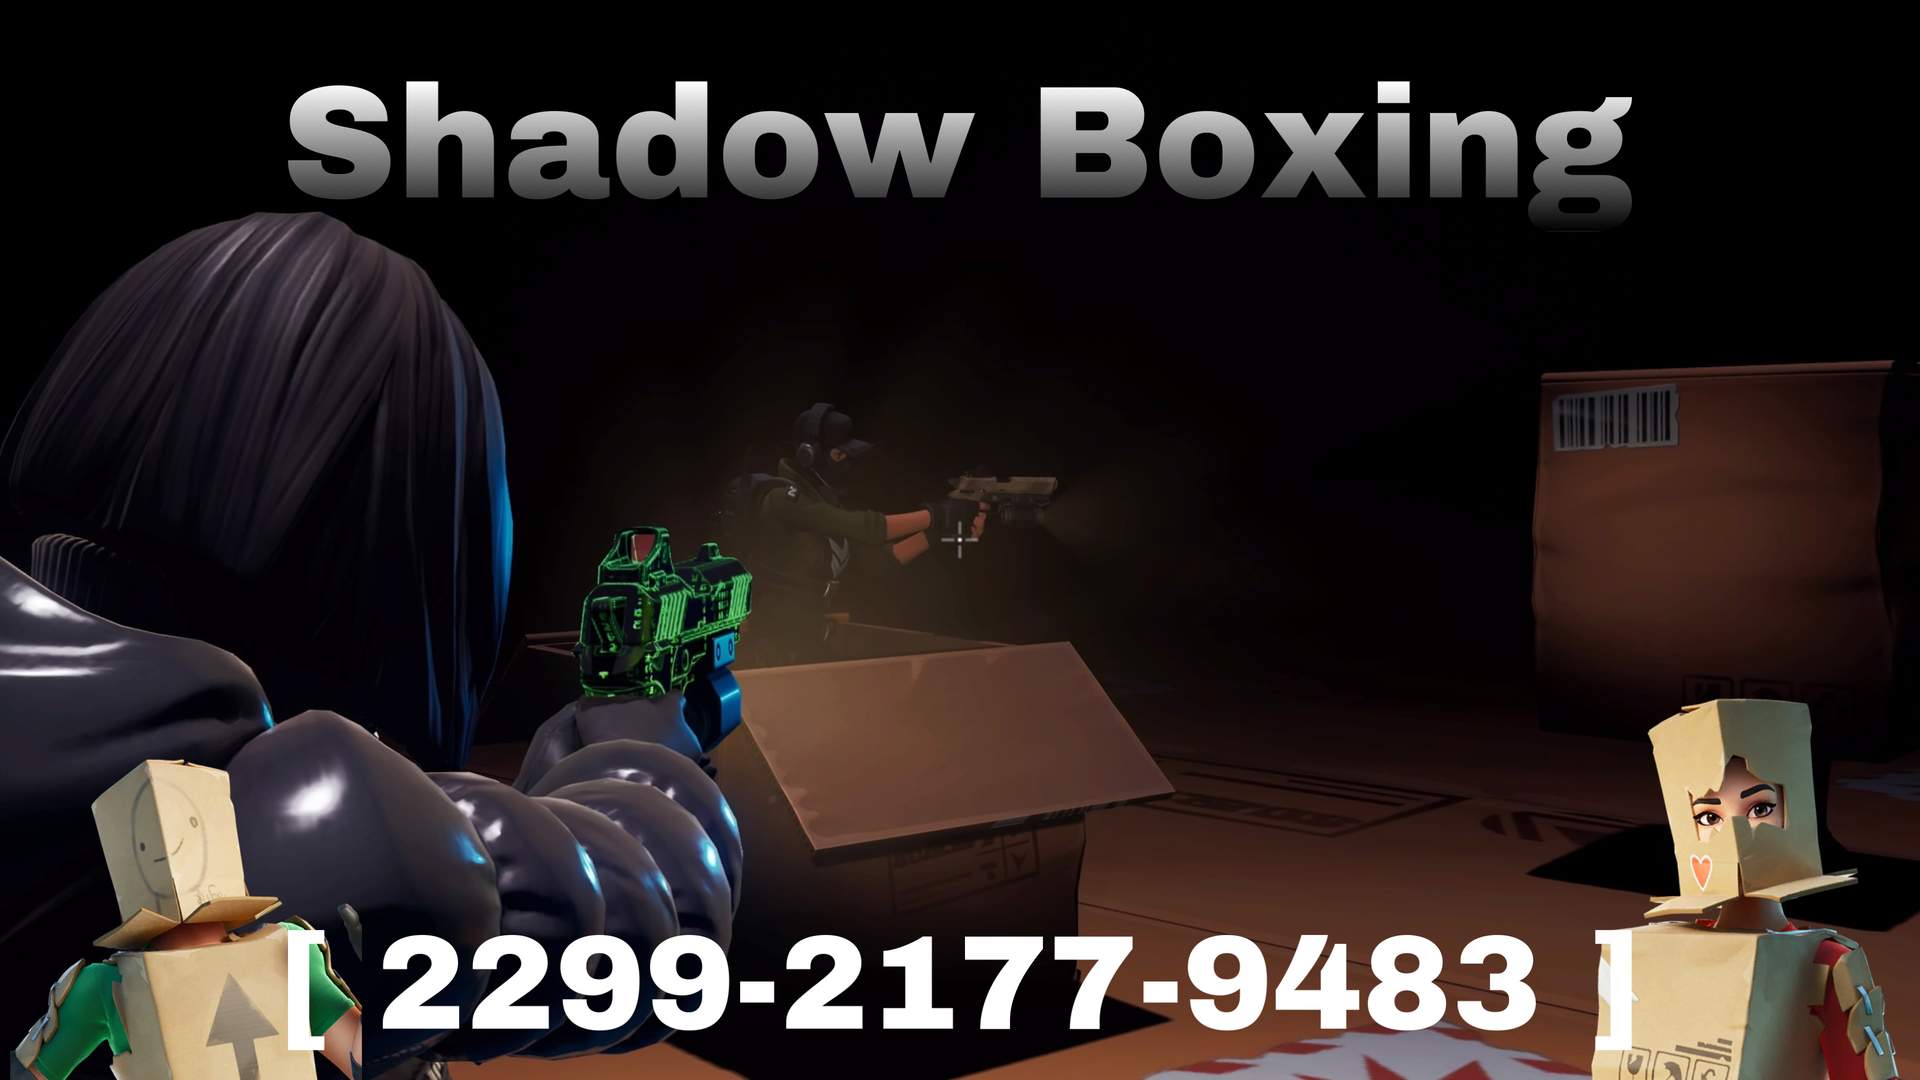 SHADOW BOXING